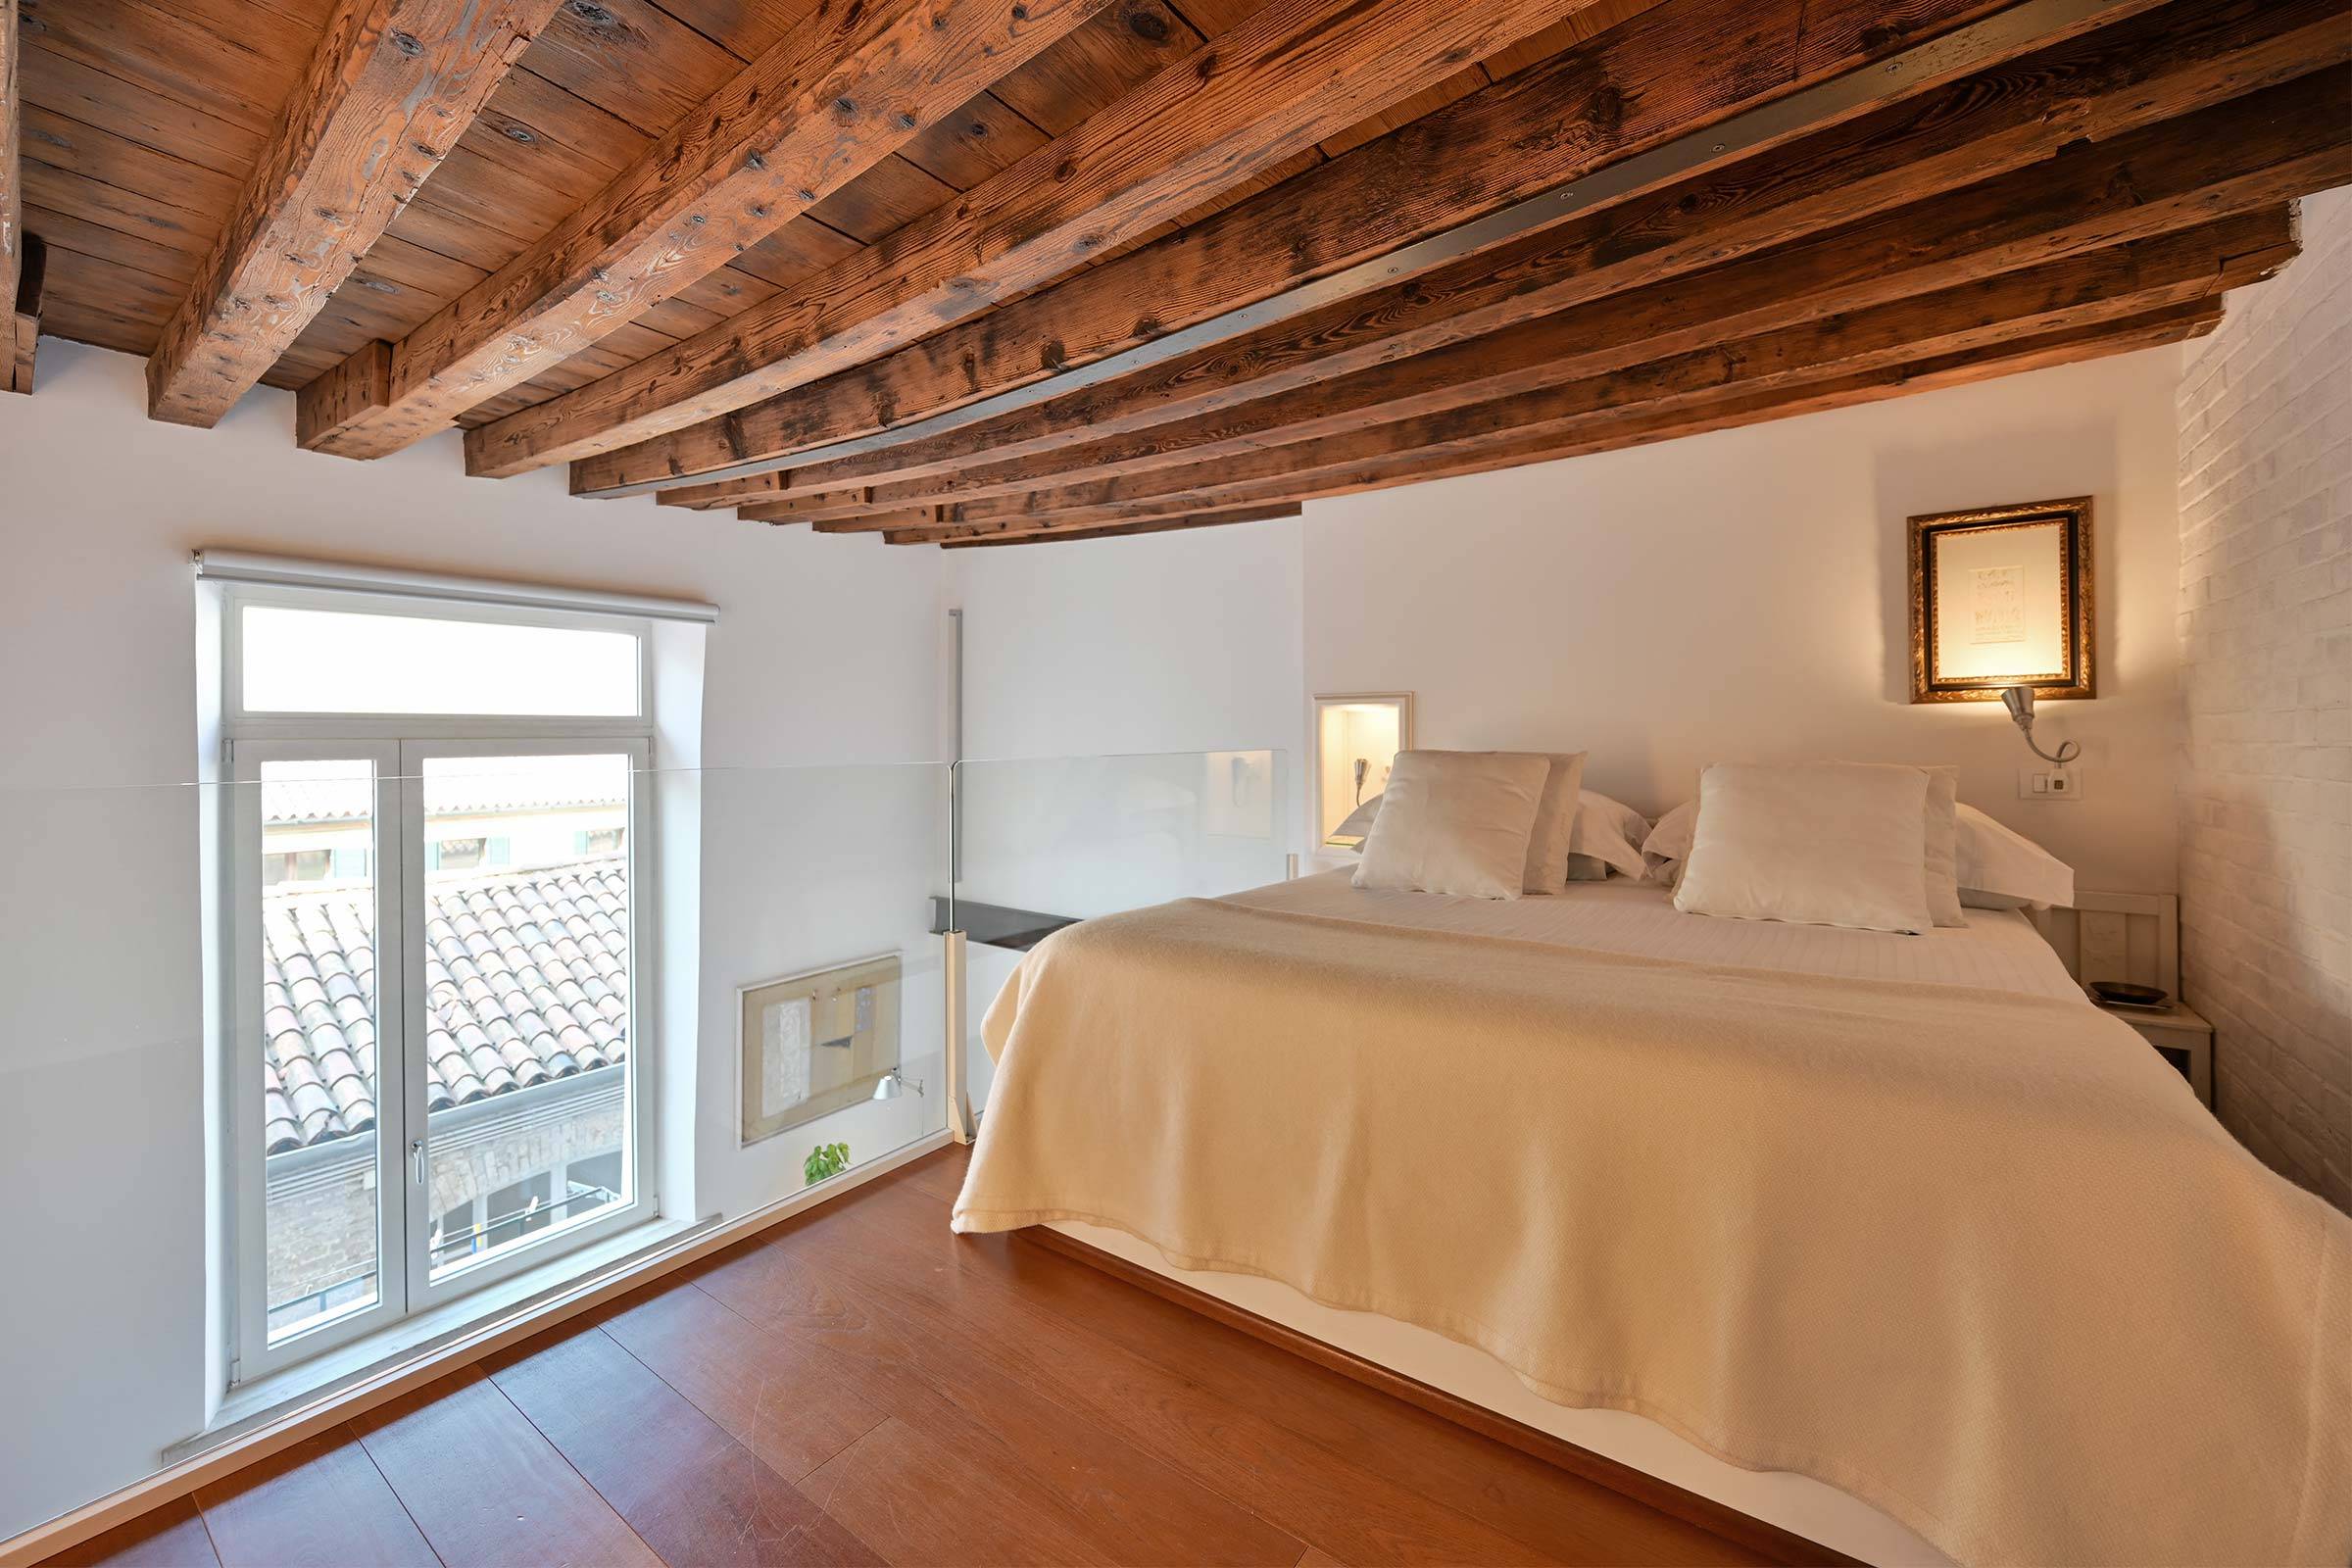 spacious bedroom in the gallery, the height of the wooden beams is about 180 cm